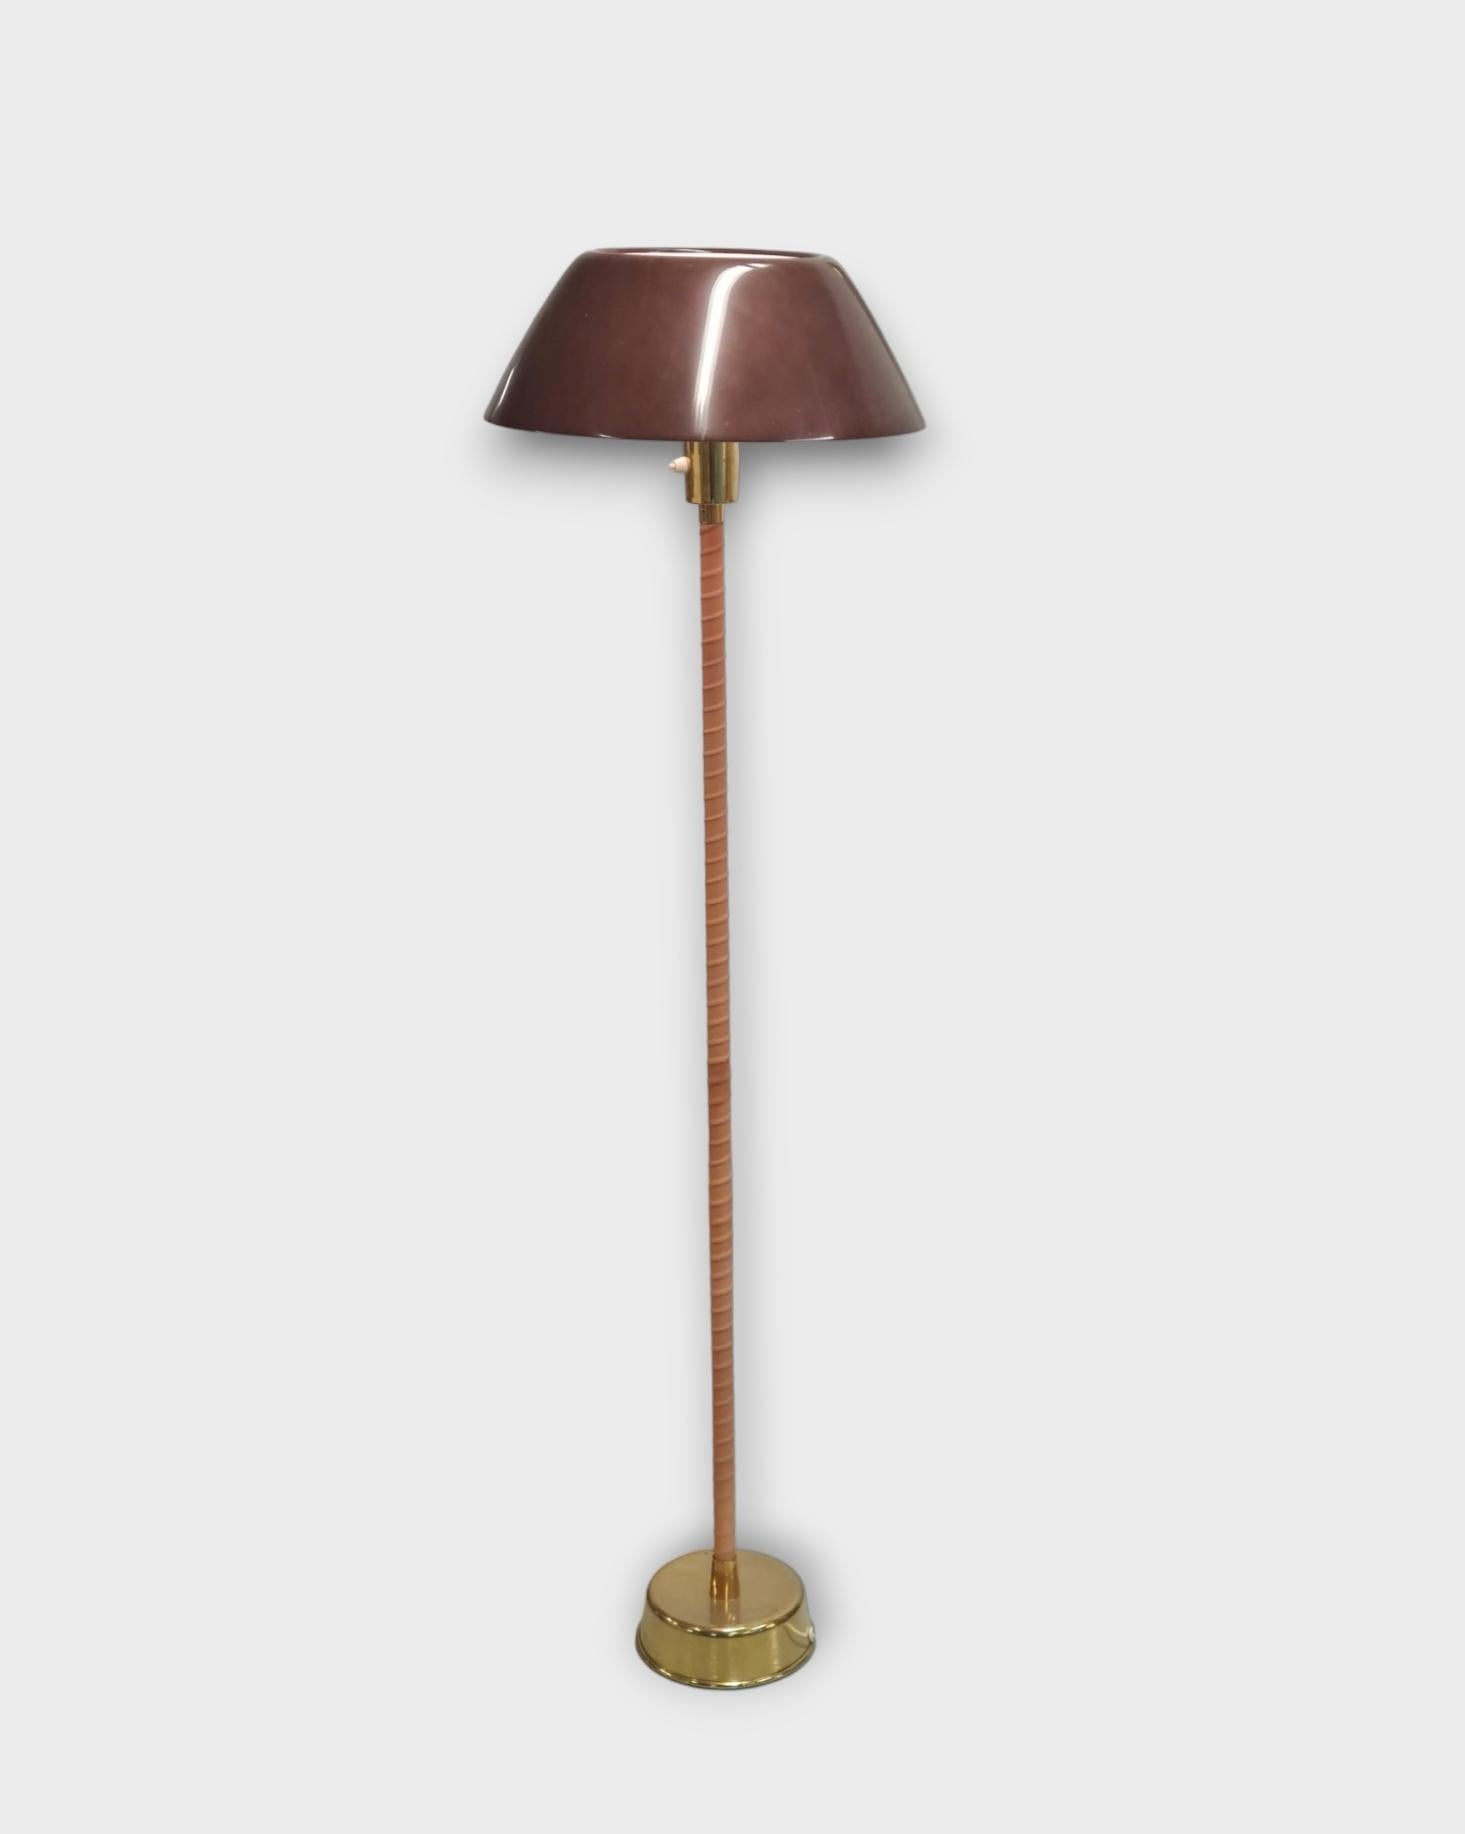 Lisa Johansson-Pape (1907-1989) was a Finnish designer best known for her works in lightings. She paid more attention to the function of the lamp firstly, then the design feature secondly.
Lisa designed furniture for Stockmann for a number of years,